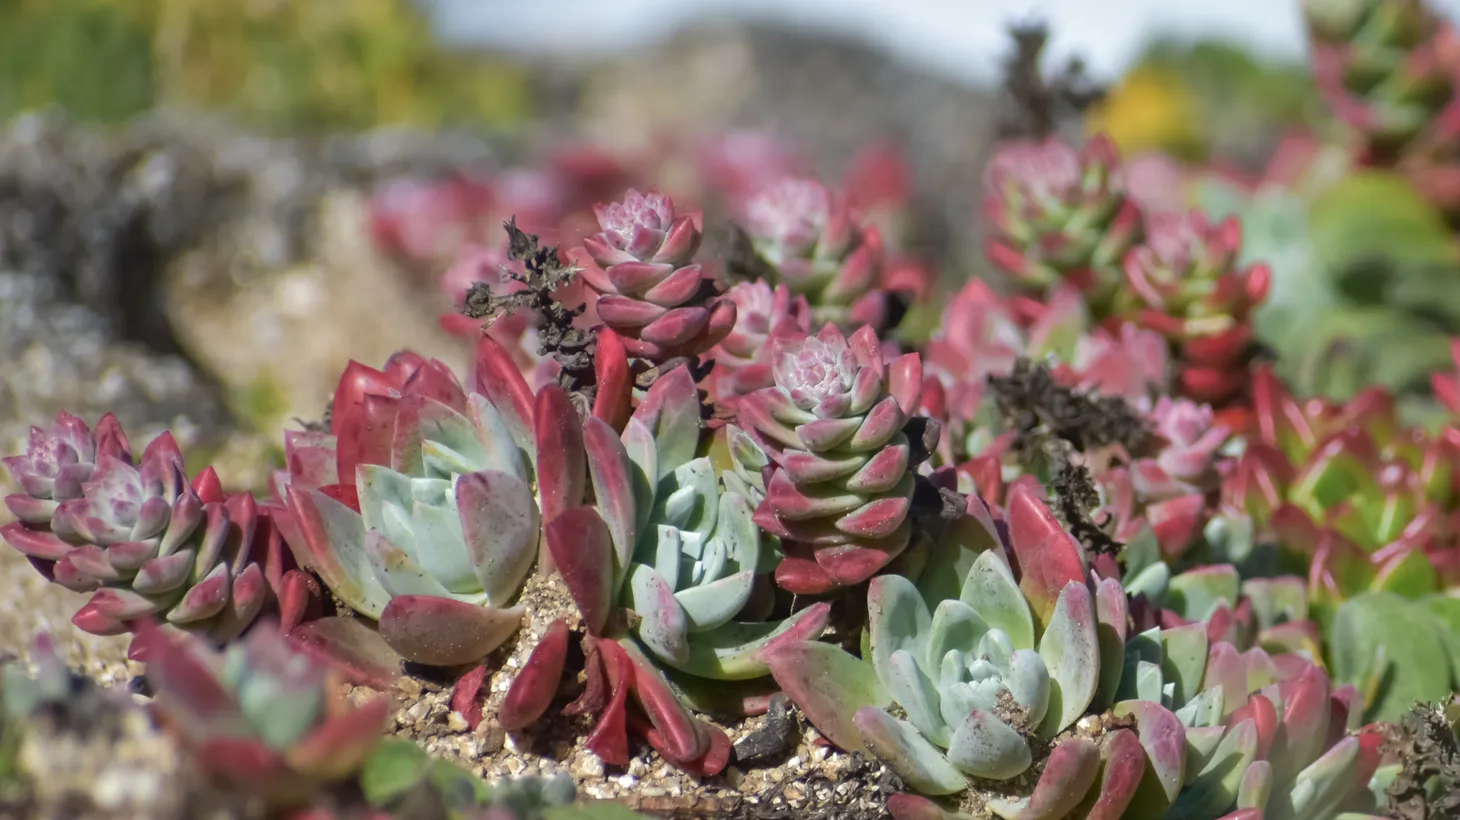 Poachers covet the dudleya farinosa succulent, which is native to the Northern California and Oregon coast. The small, flowering plants take years to mature and sell for hundreds of dollars or more on the overseas black market.